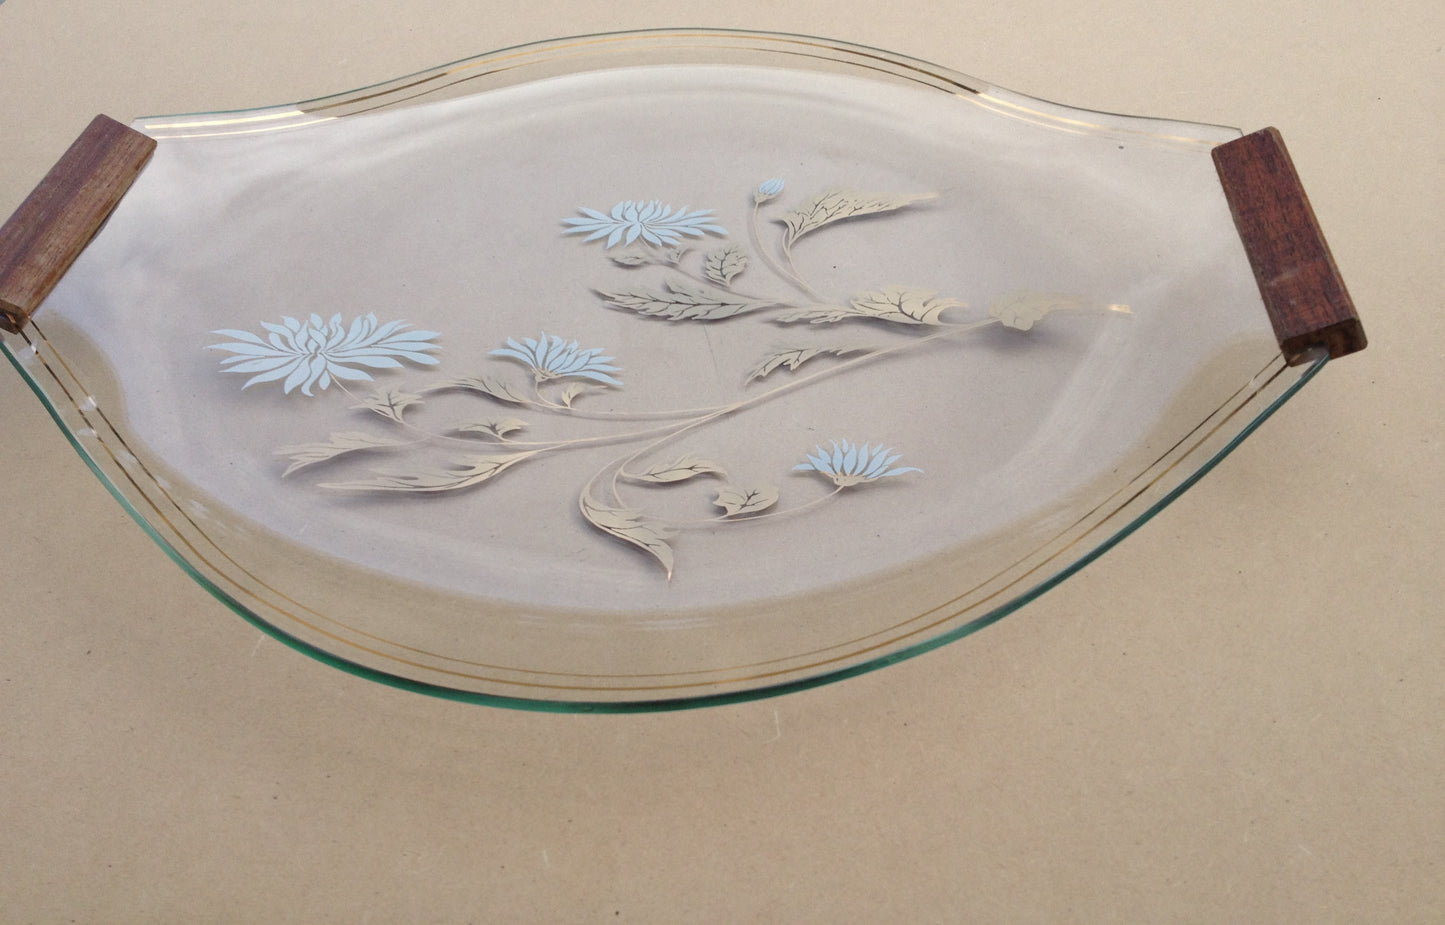 Glass Serving Plate with Wooden Handles and Flora Design